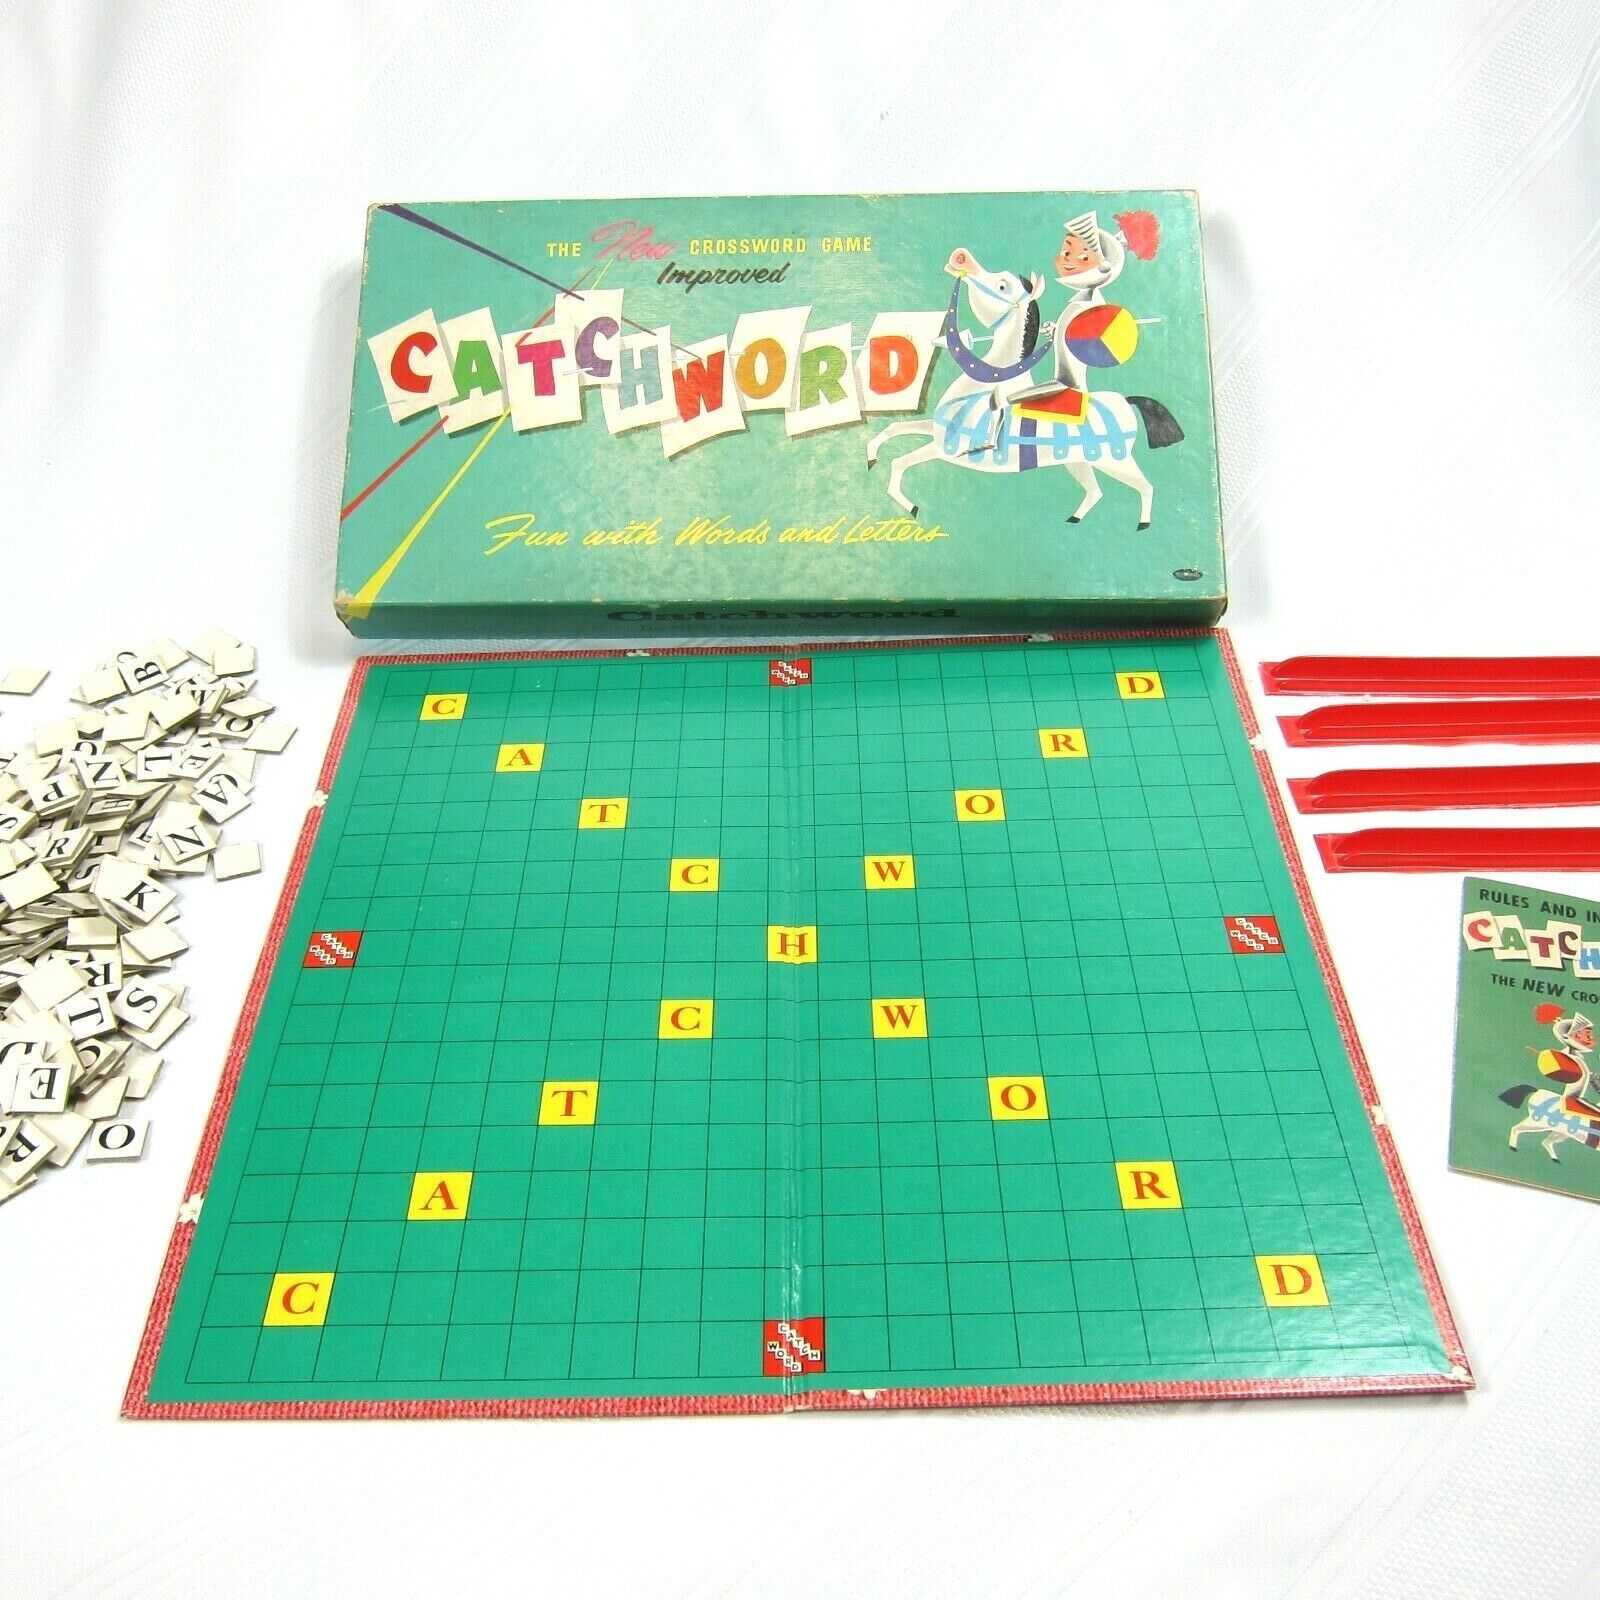 Vintage 1950s Catchword Crossword Board Game Whitman Publishing Co. Made in USA - £15.73 GBP